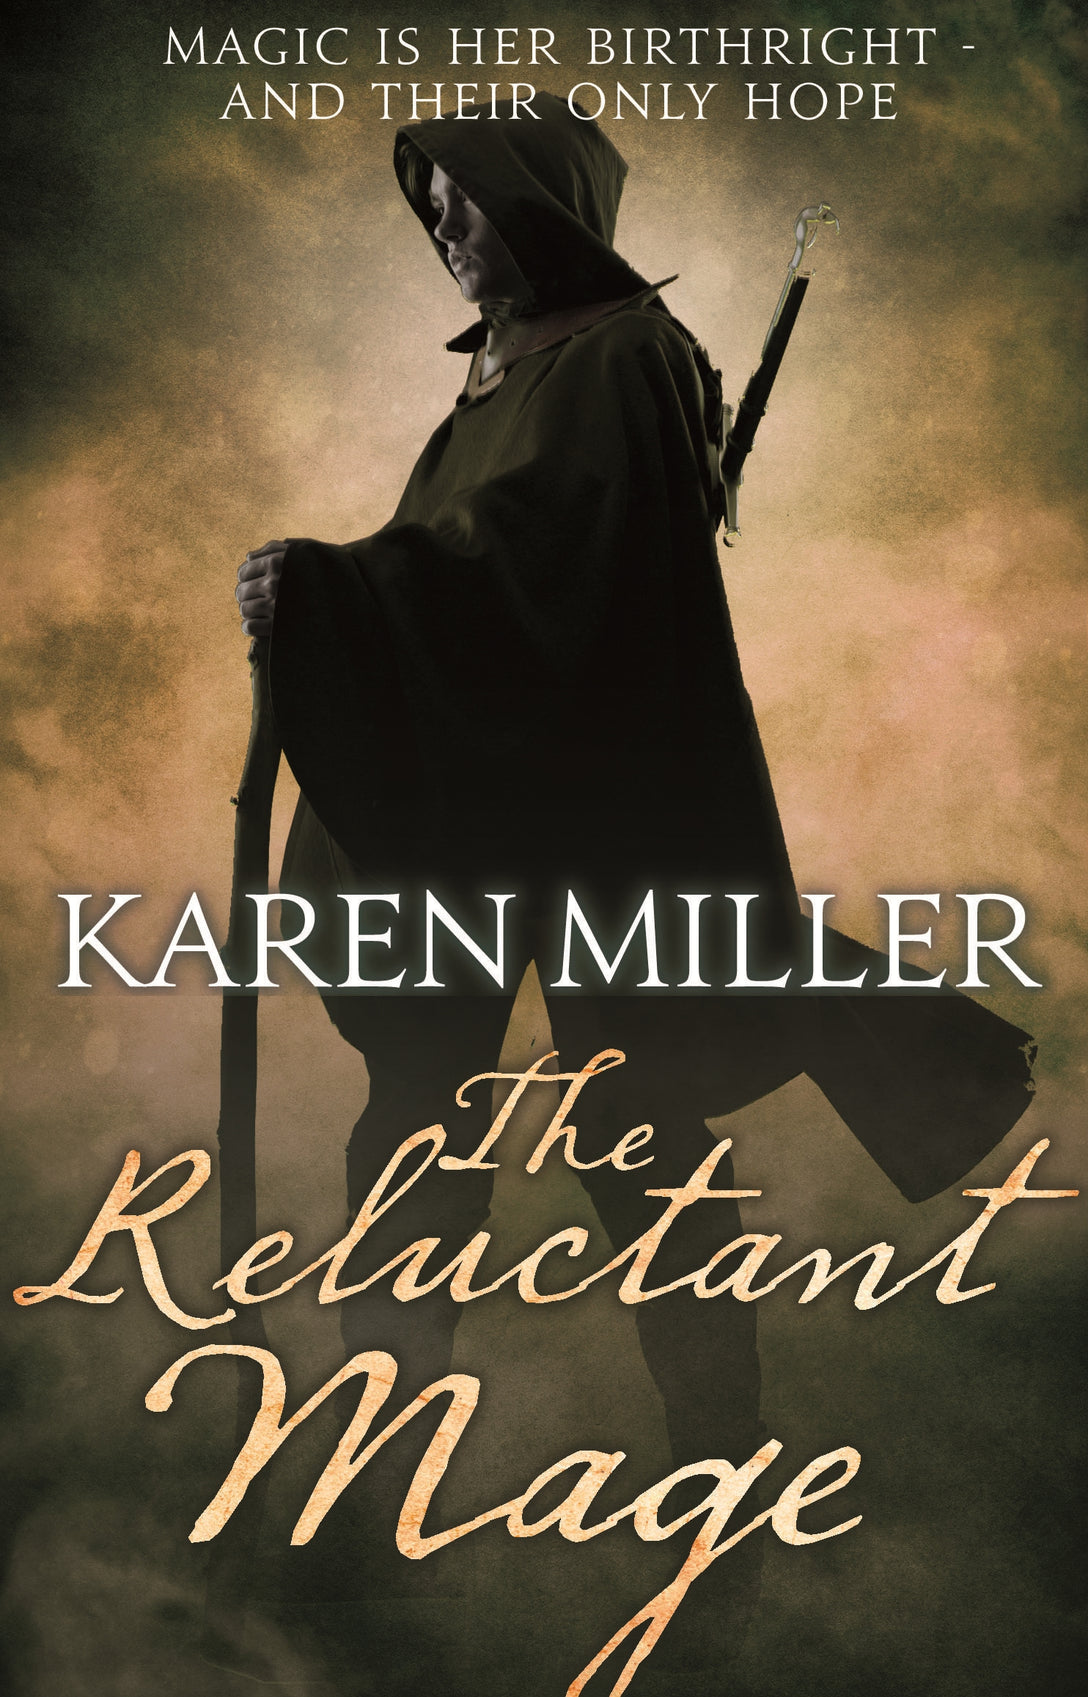 The Reluctant Mage by Karen Miller